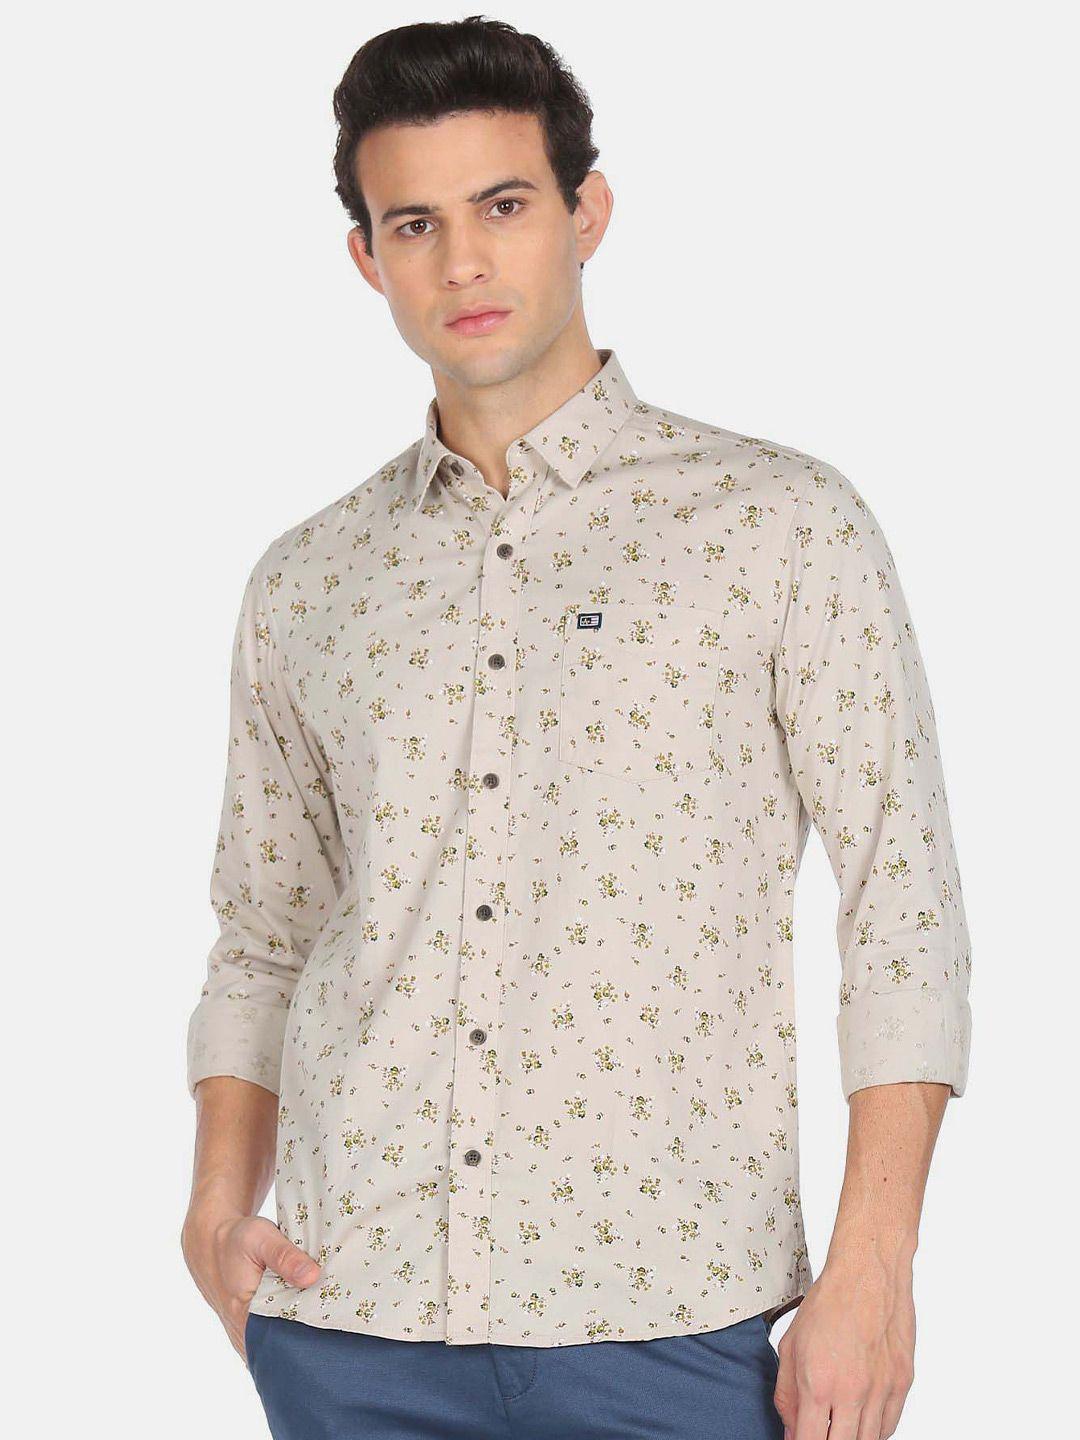 arrow-sport-floral-printed-pure-cotton-slim-fit-casual-shirt